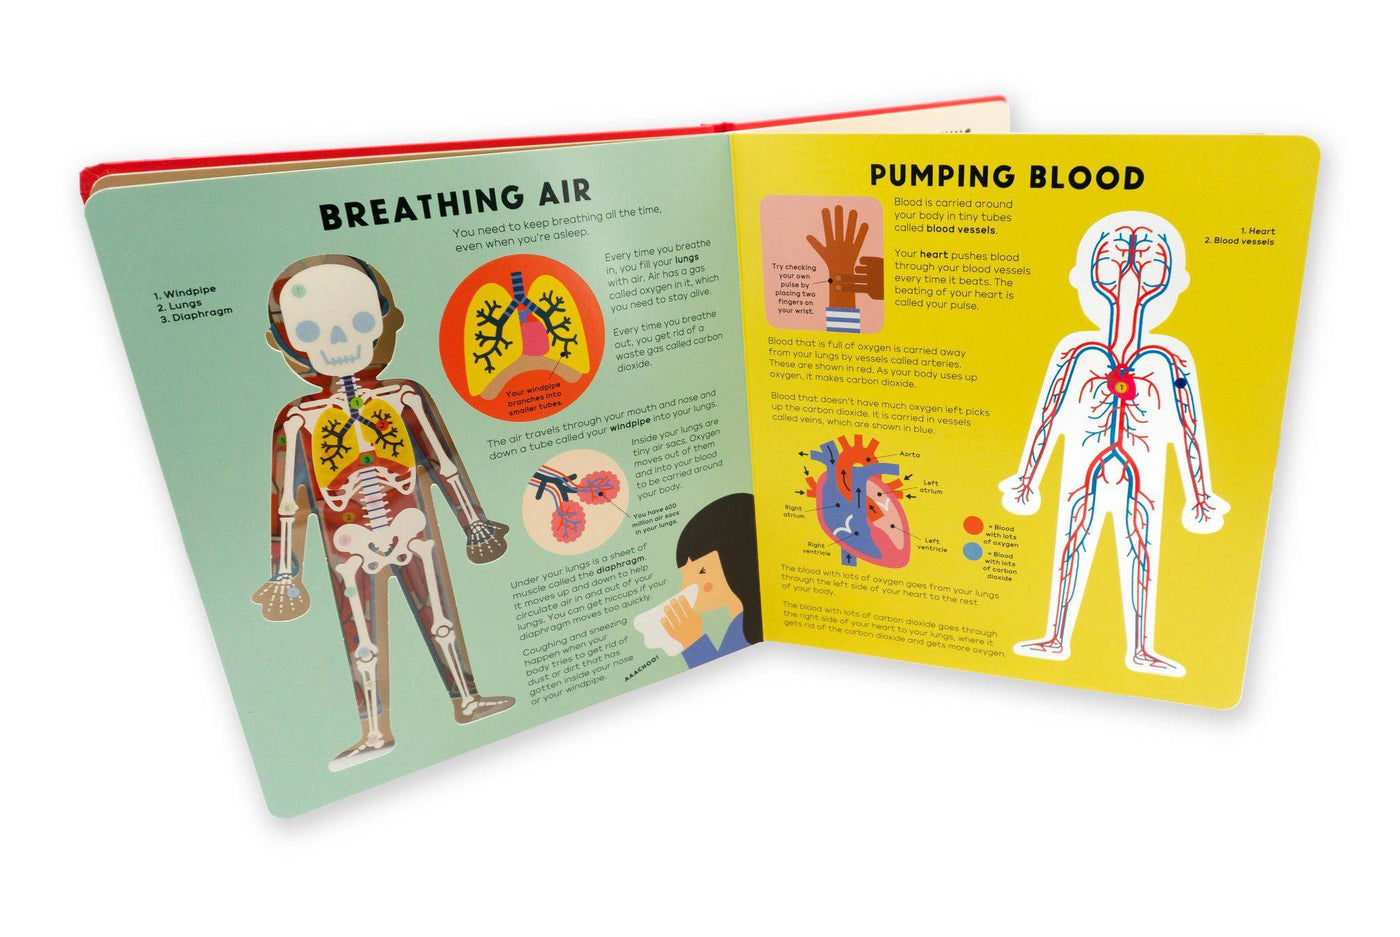 THE BODY BOOK - Interactive Science Book of Anatomy for Kids 7 Years & Up - Discovery Toys